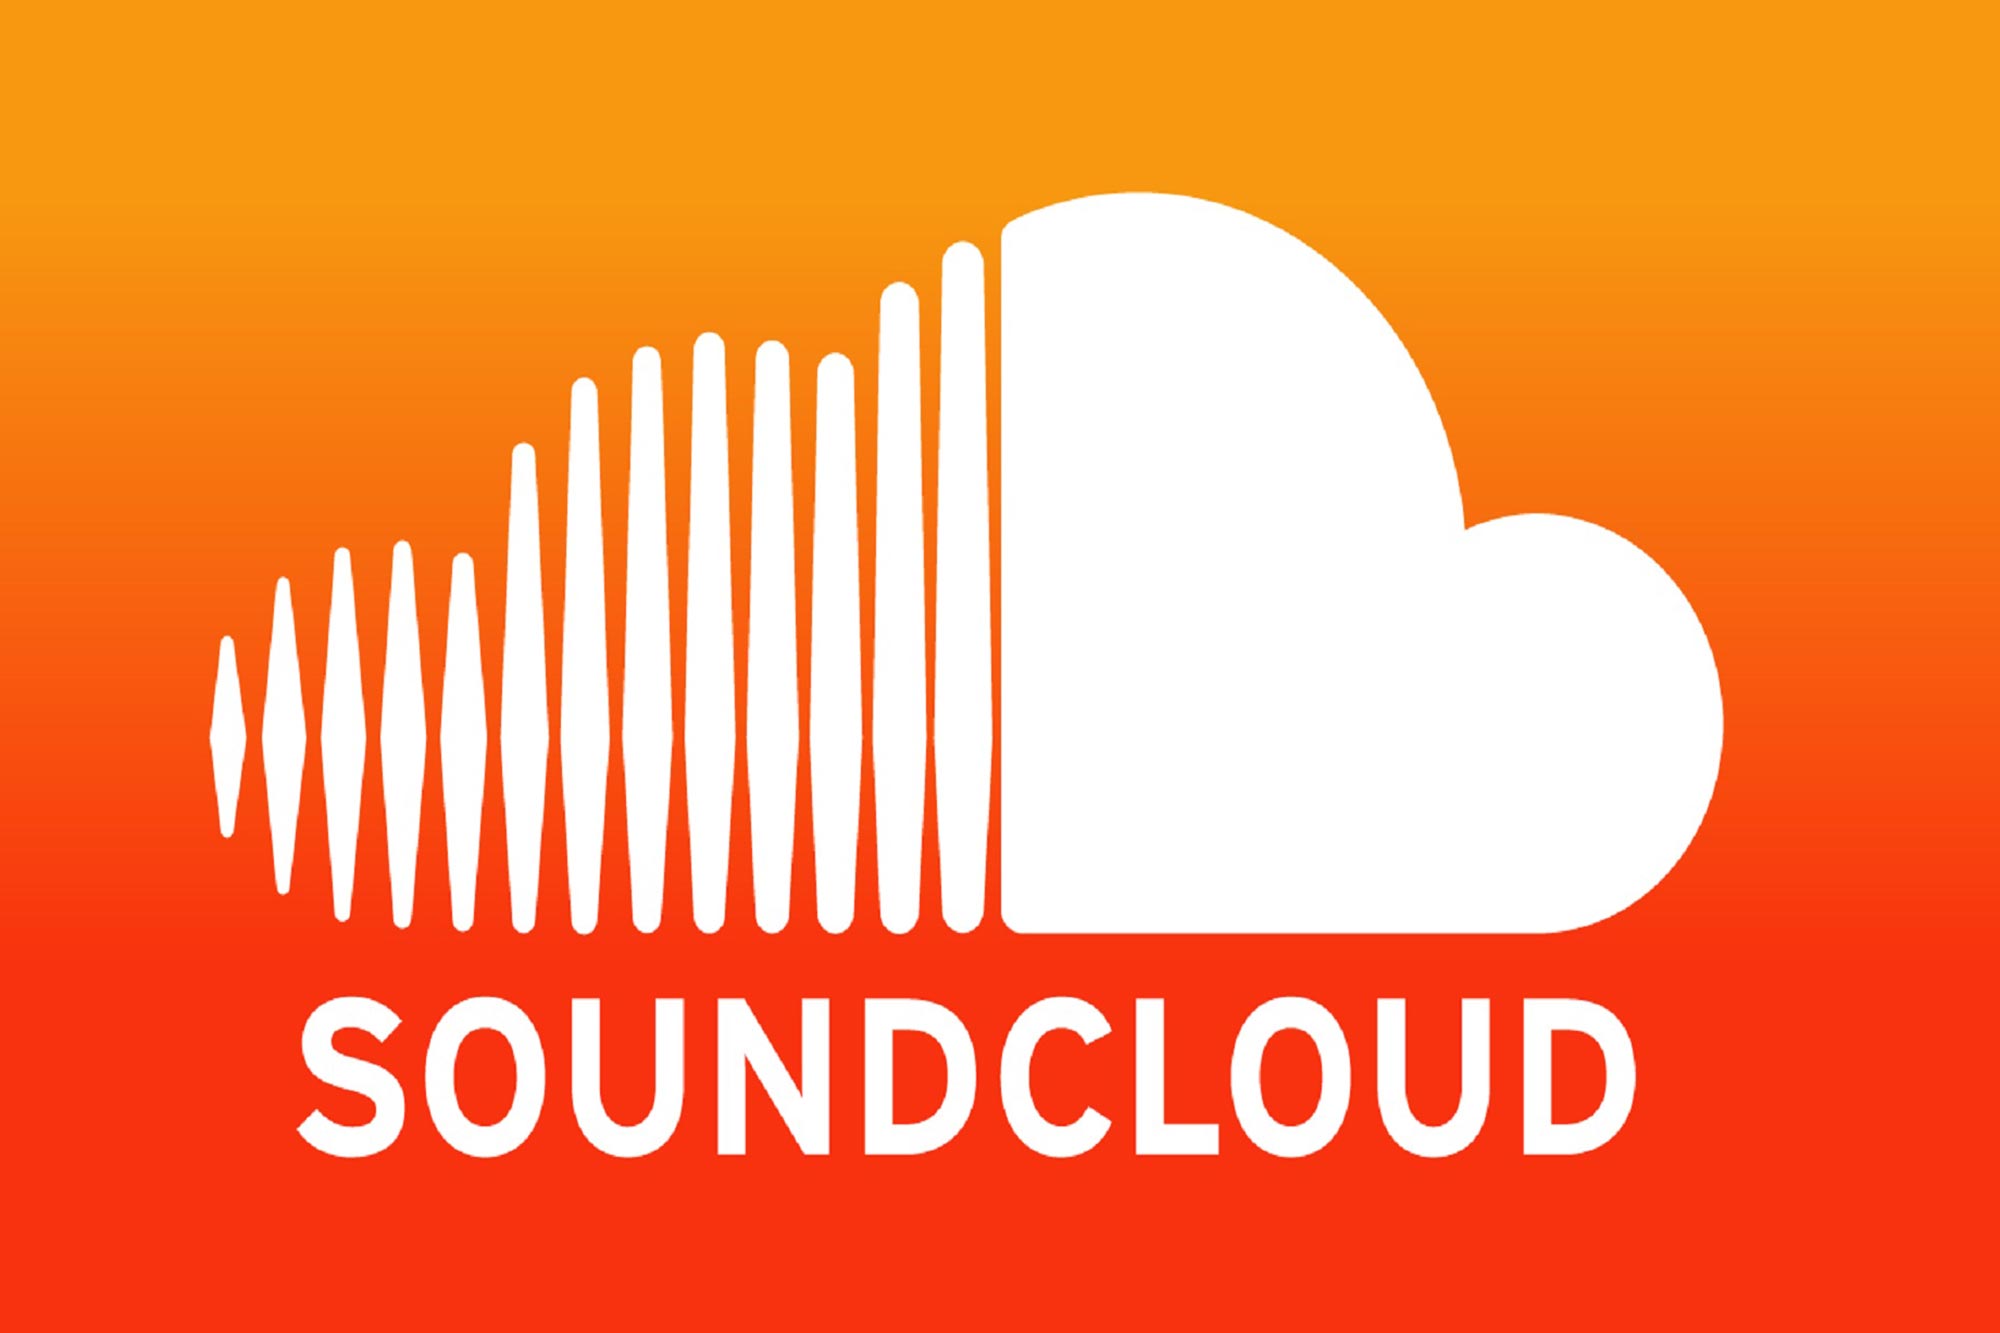 Sign Up for Soundcloud